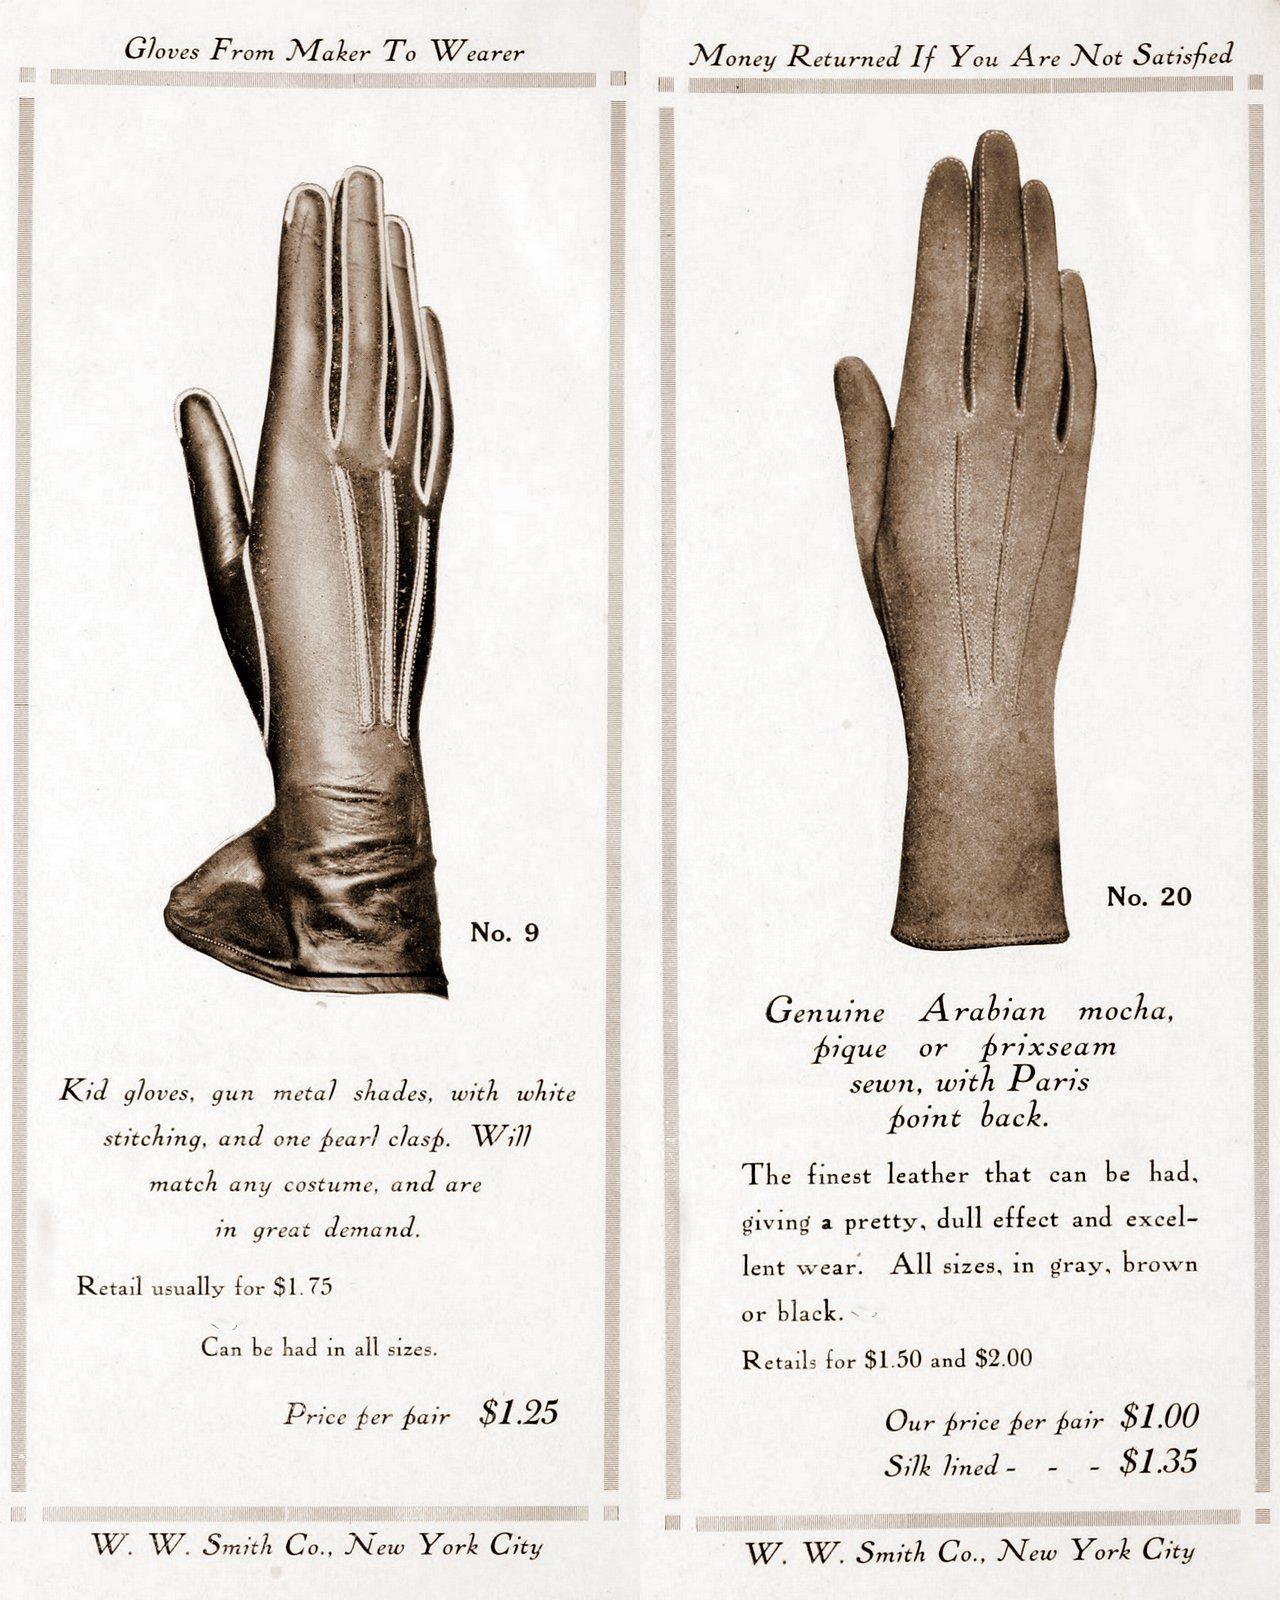 Antique gloves - styles for women from 1912 (3)